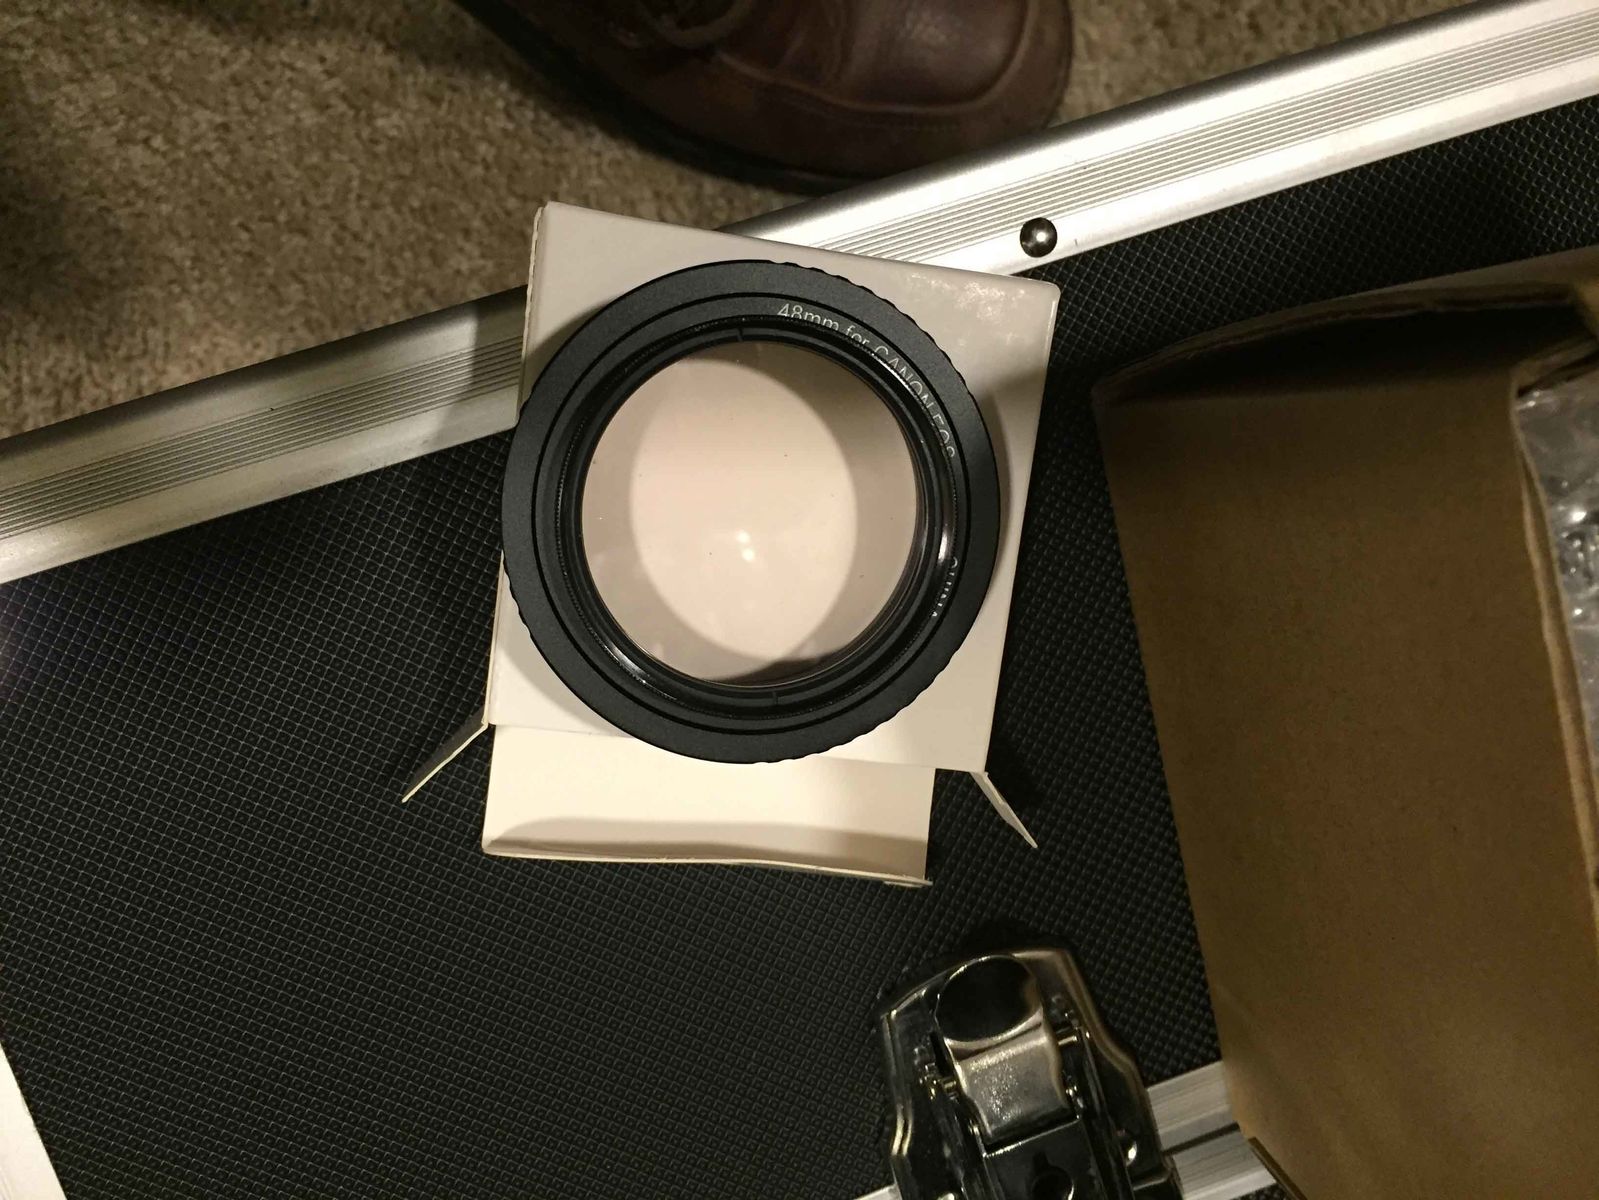 48mm Canon adapter